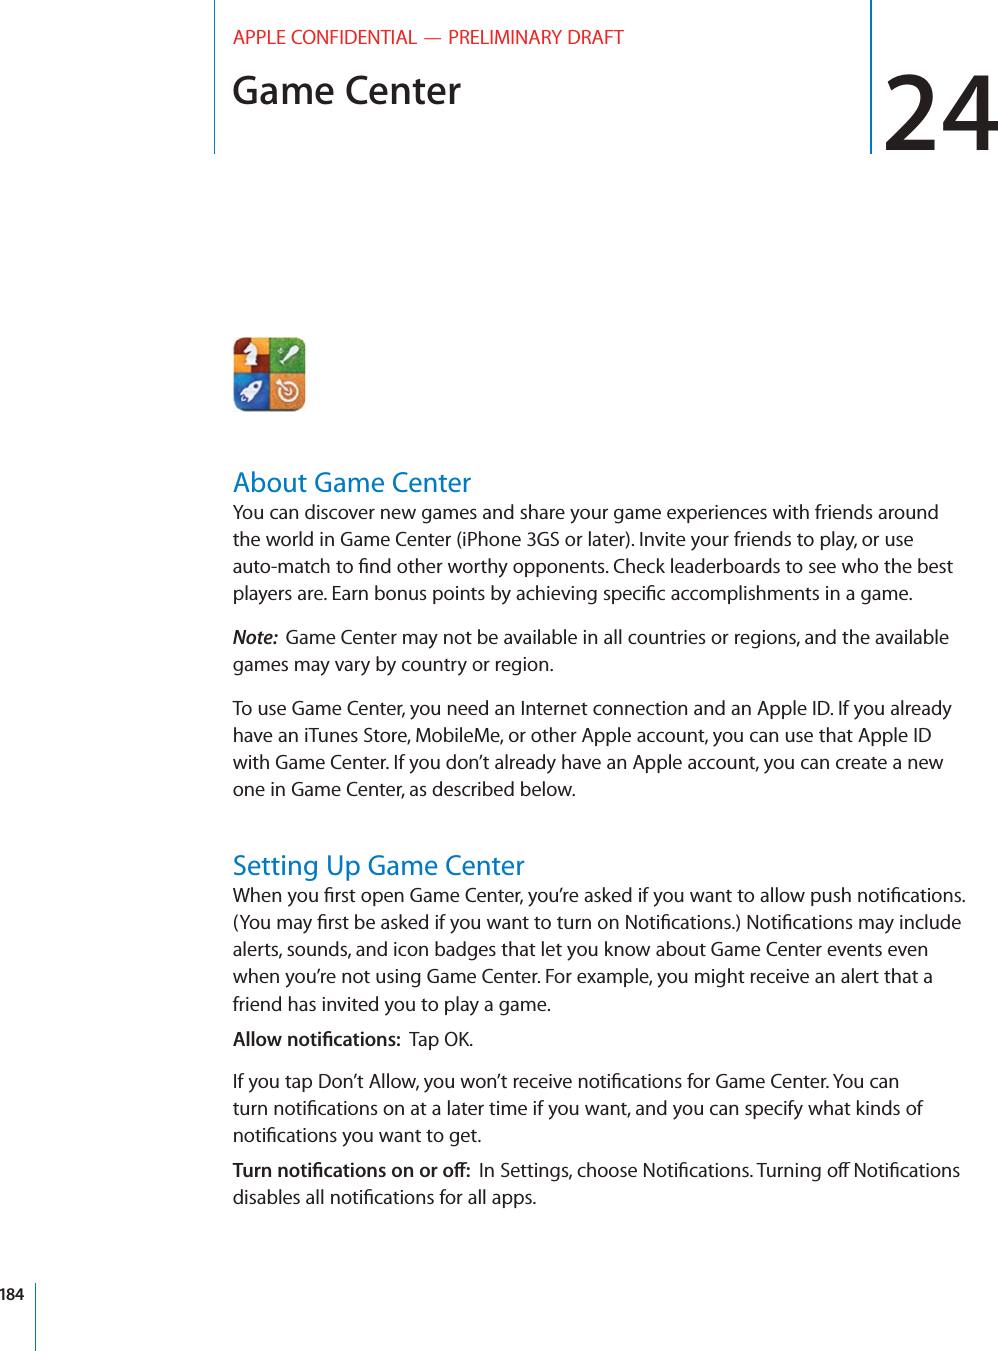 Game Center 24APPLE CONFIDENTIAL — PRELIMINARY DRAFTAbout Game CenterYou can discover new games and share your game experiences with friends around the world in Game Center (iPhone 3GS or later). Invite your friends to play, or use Note:  Game Center may not be available in all countries or regions, and the available games may vary by country or region.To use Game Center, you need an Internet connection and an Apple ID. If you already have an iTunes Store, MobileMe, or other Apple account, you can use that Apple ID with Game Center. If you don’t already have an Apple account, you can create a new one in Game Center, as described below.Setting Up Game Centeralerts, sounds, and icon badges that let you know about Game Center events even when you’re not using Game Center. For example, you might receive an alert that a friend has invited you to play a game. ,,/7./4)=#!4)/.352../4)=#!4)/.3/./2/?184